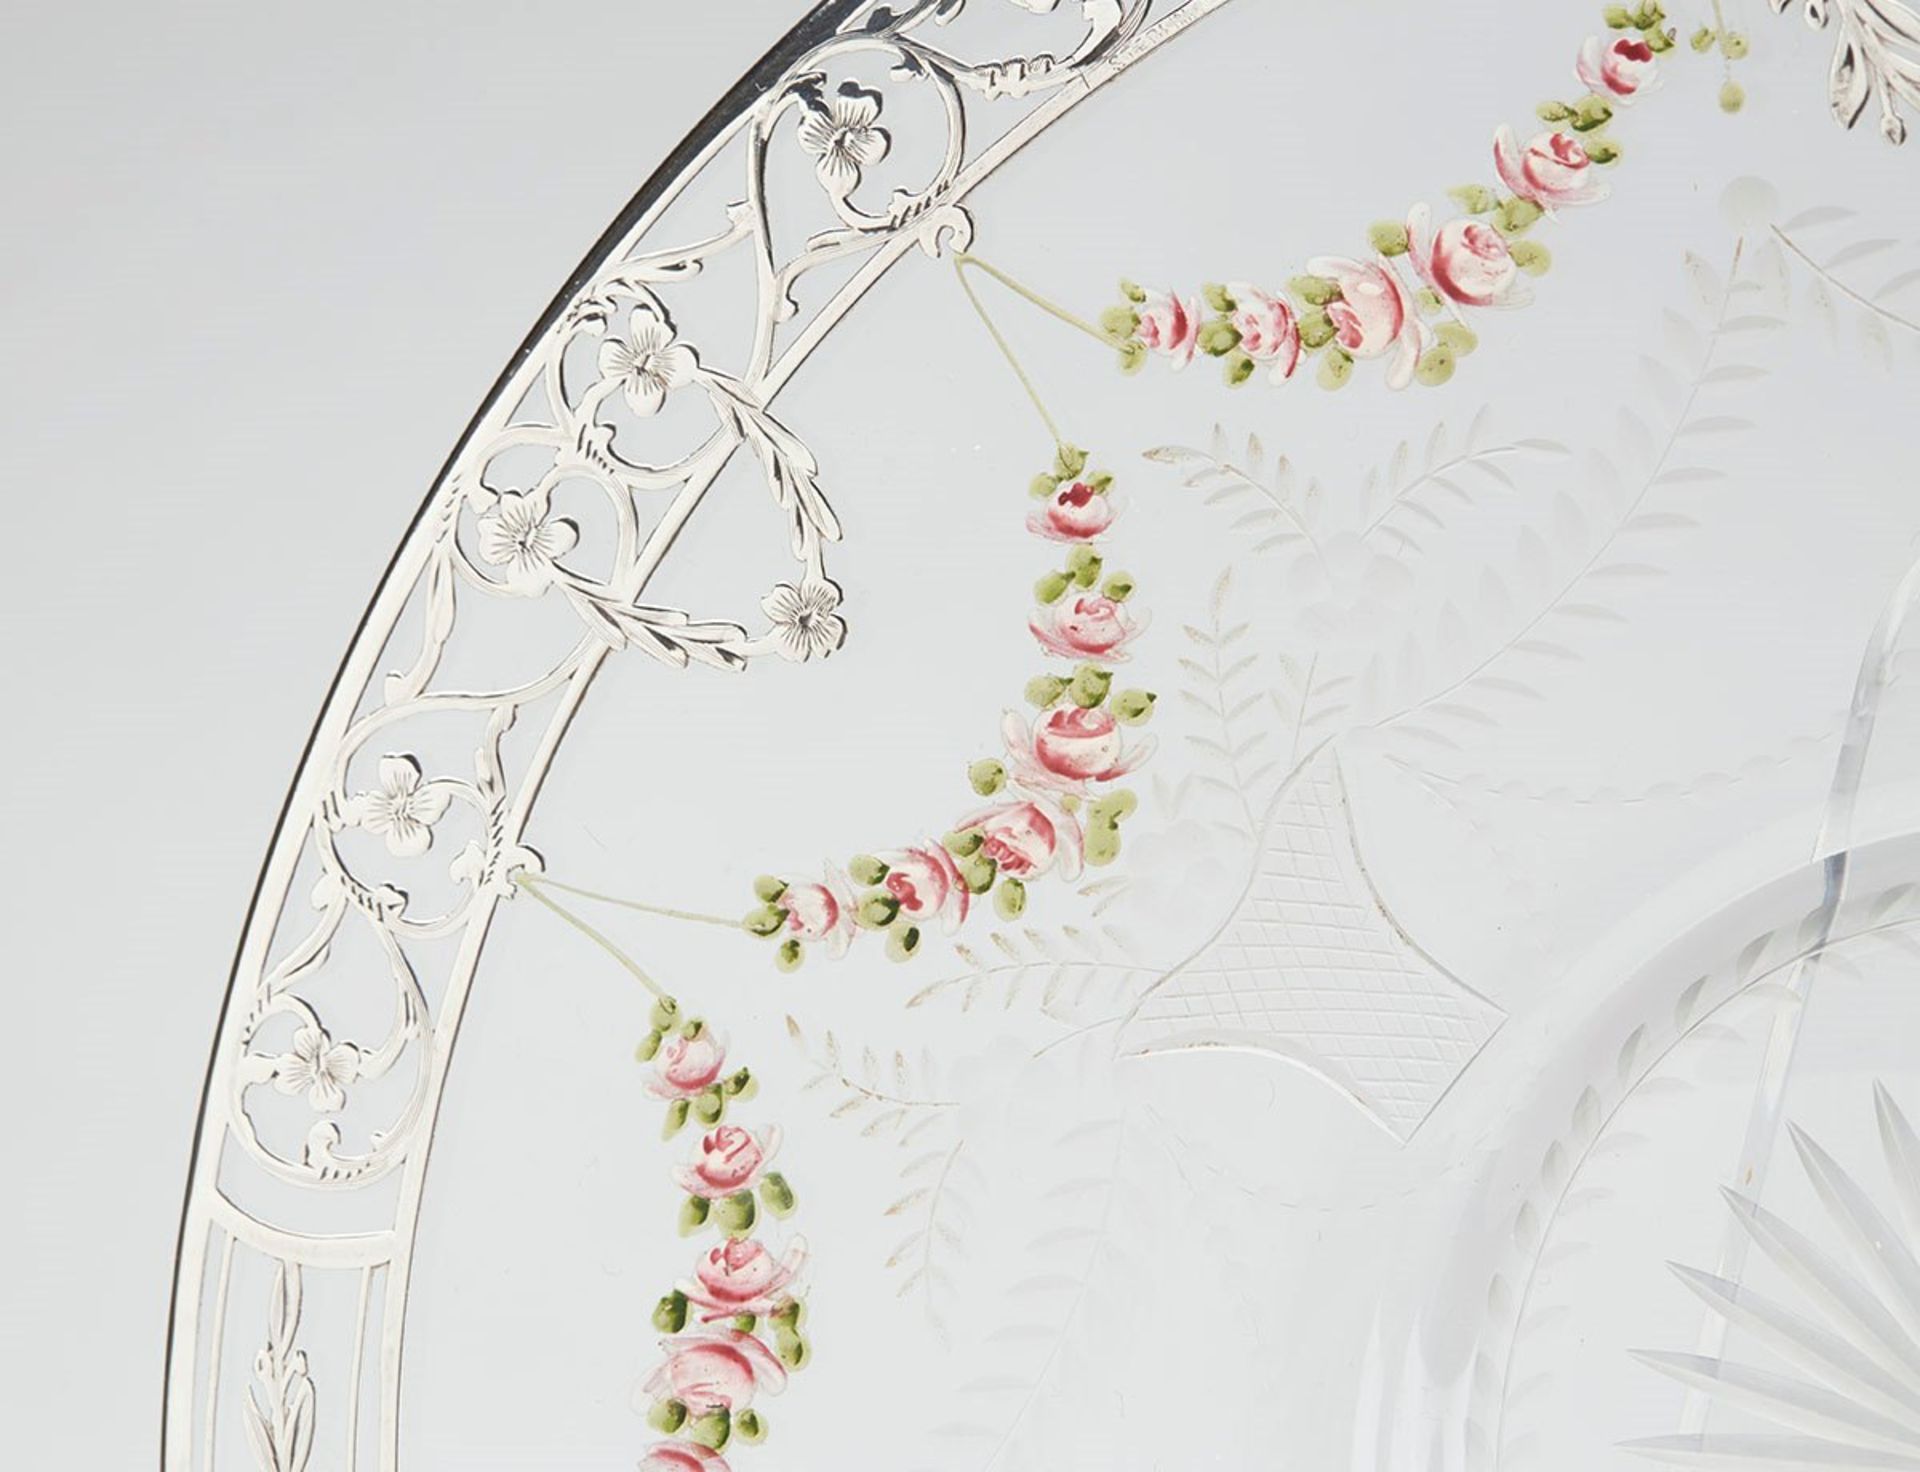 Antique Silver Overlay Floral Enamel Glass Plate 19Th C. - Image 3 of 6